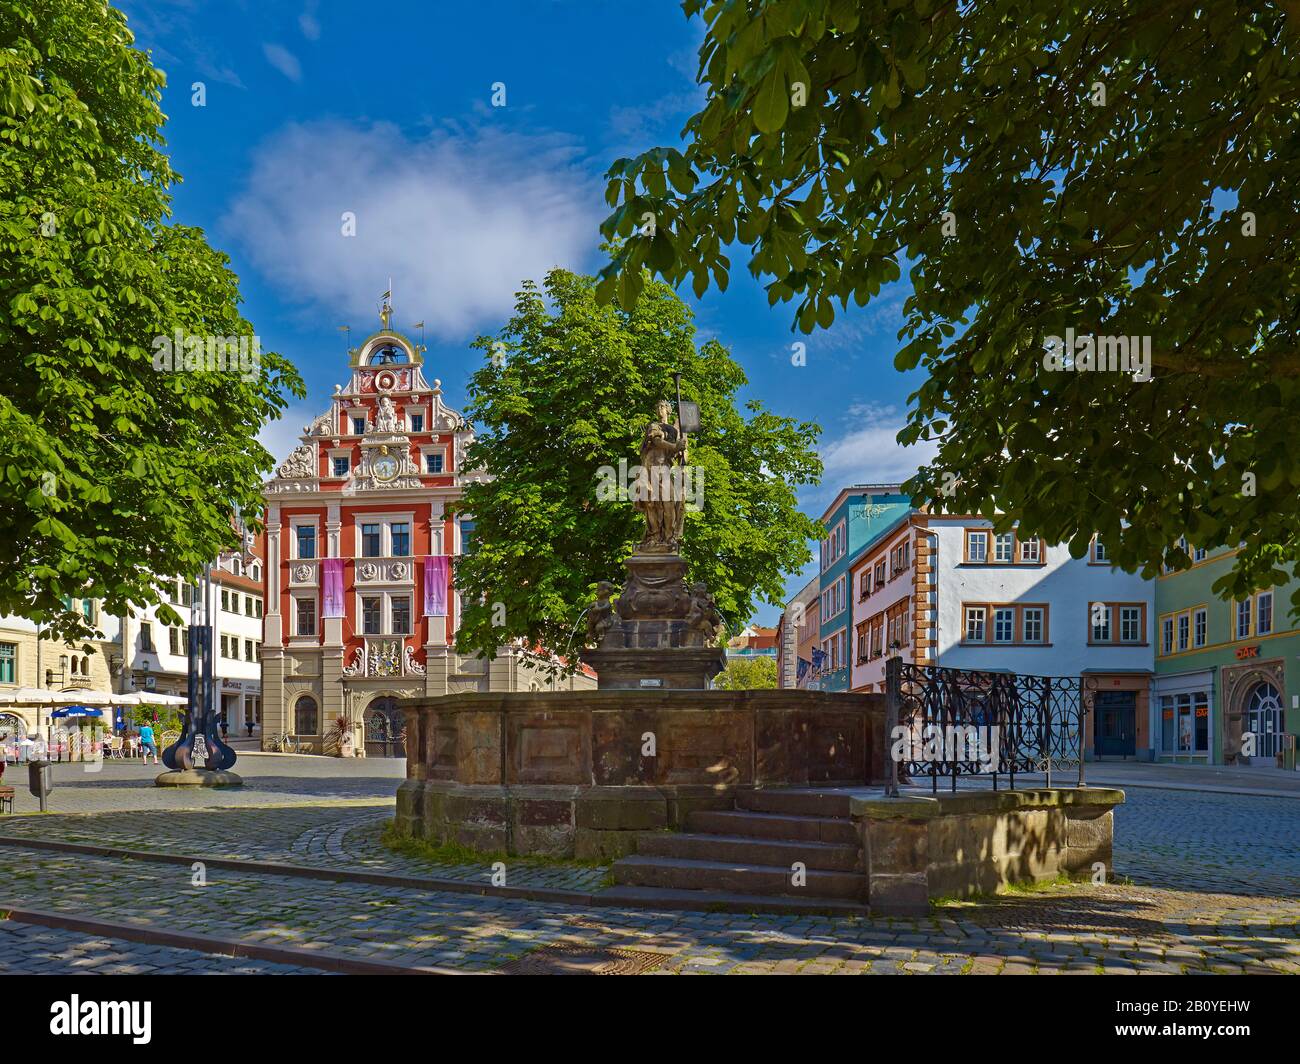 Hauptmarkt with a bells and a standing figure of the Fama, town hall in Gotha, Thuringia, Germany, Stock Photo